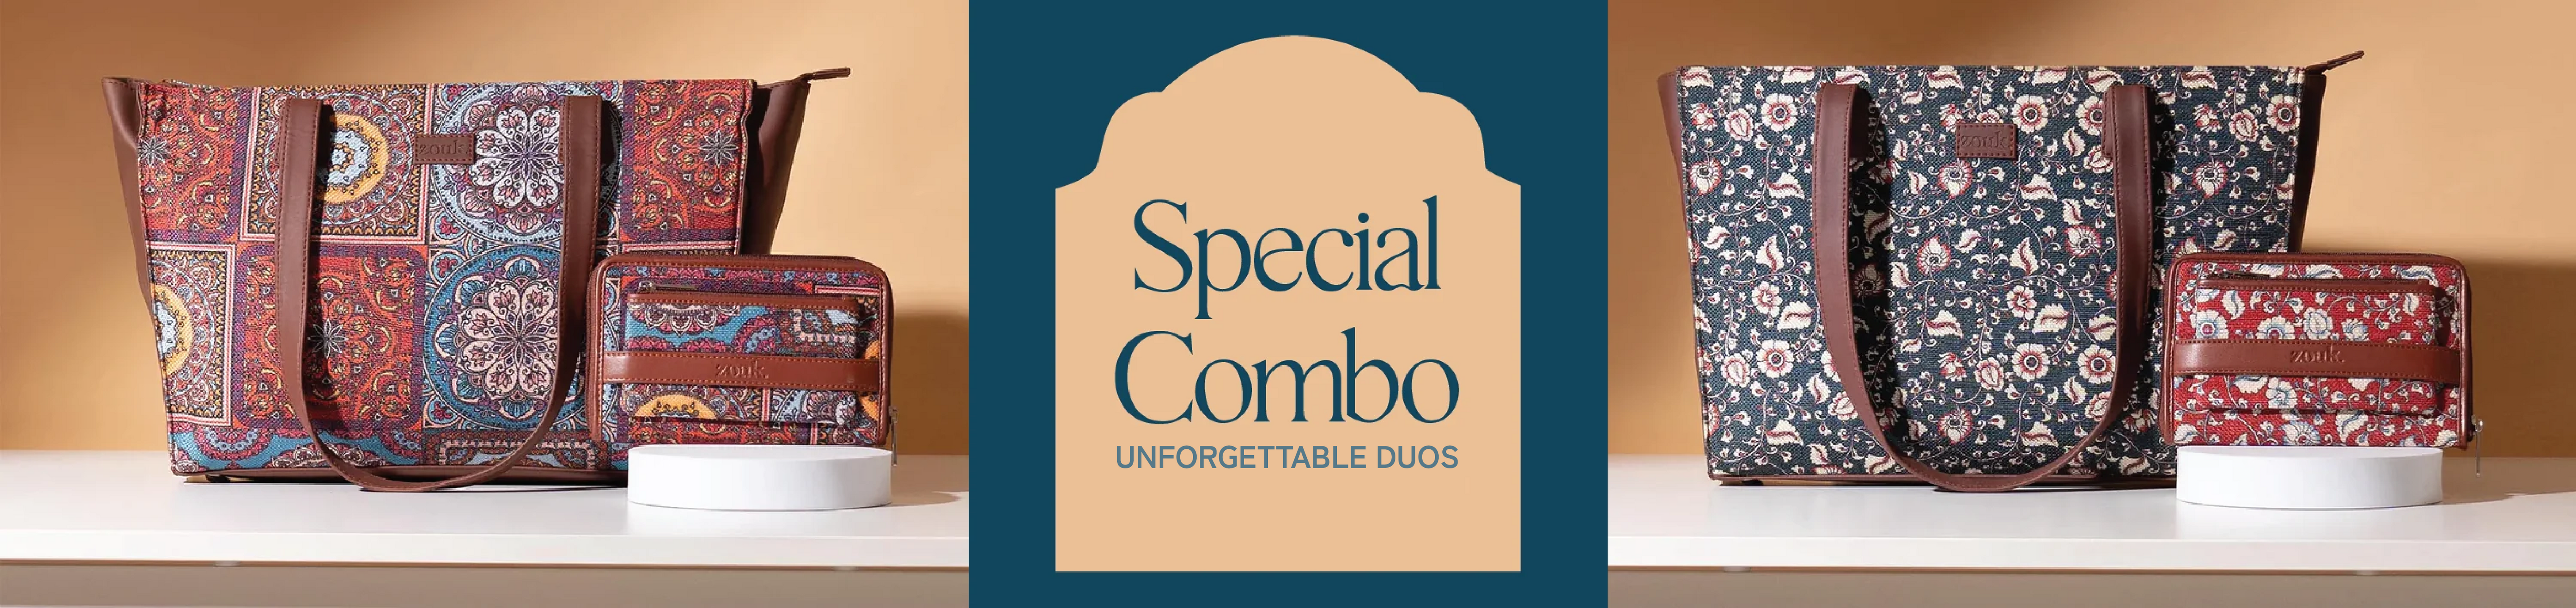 Special Combos